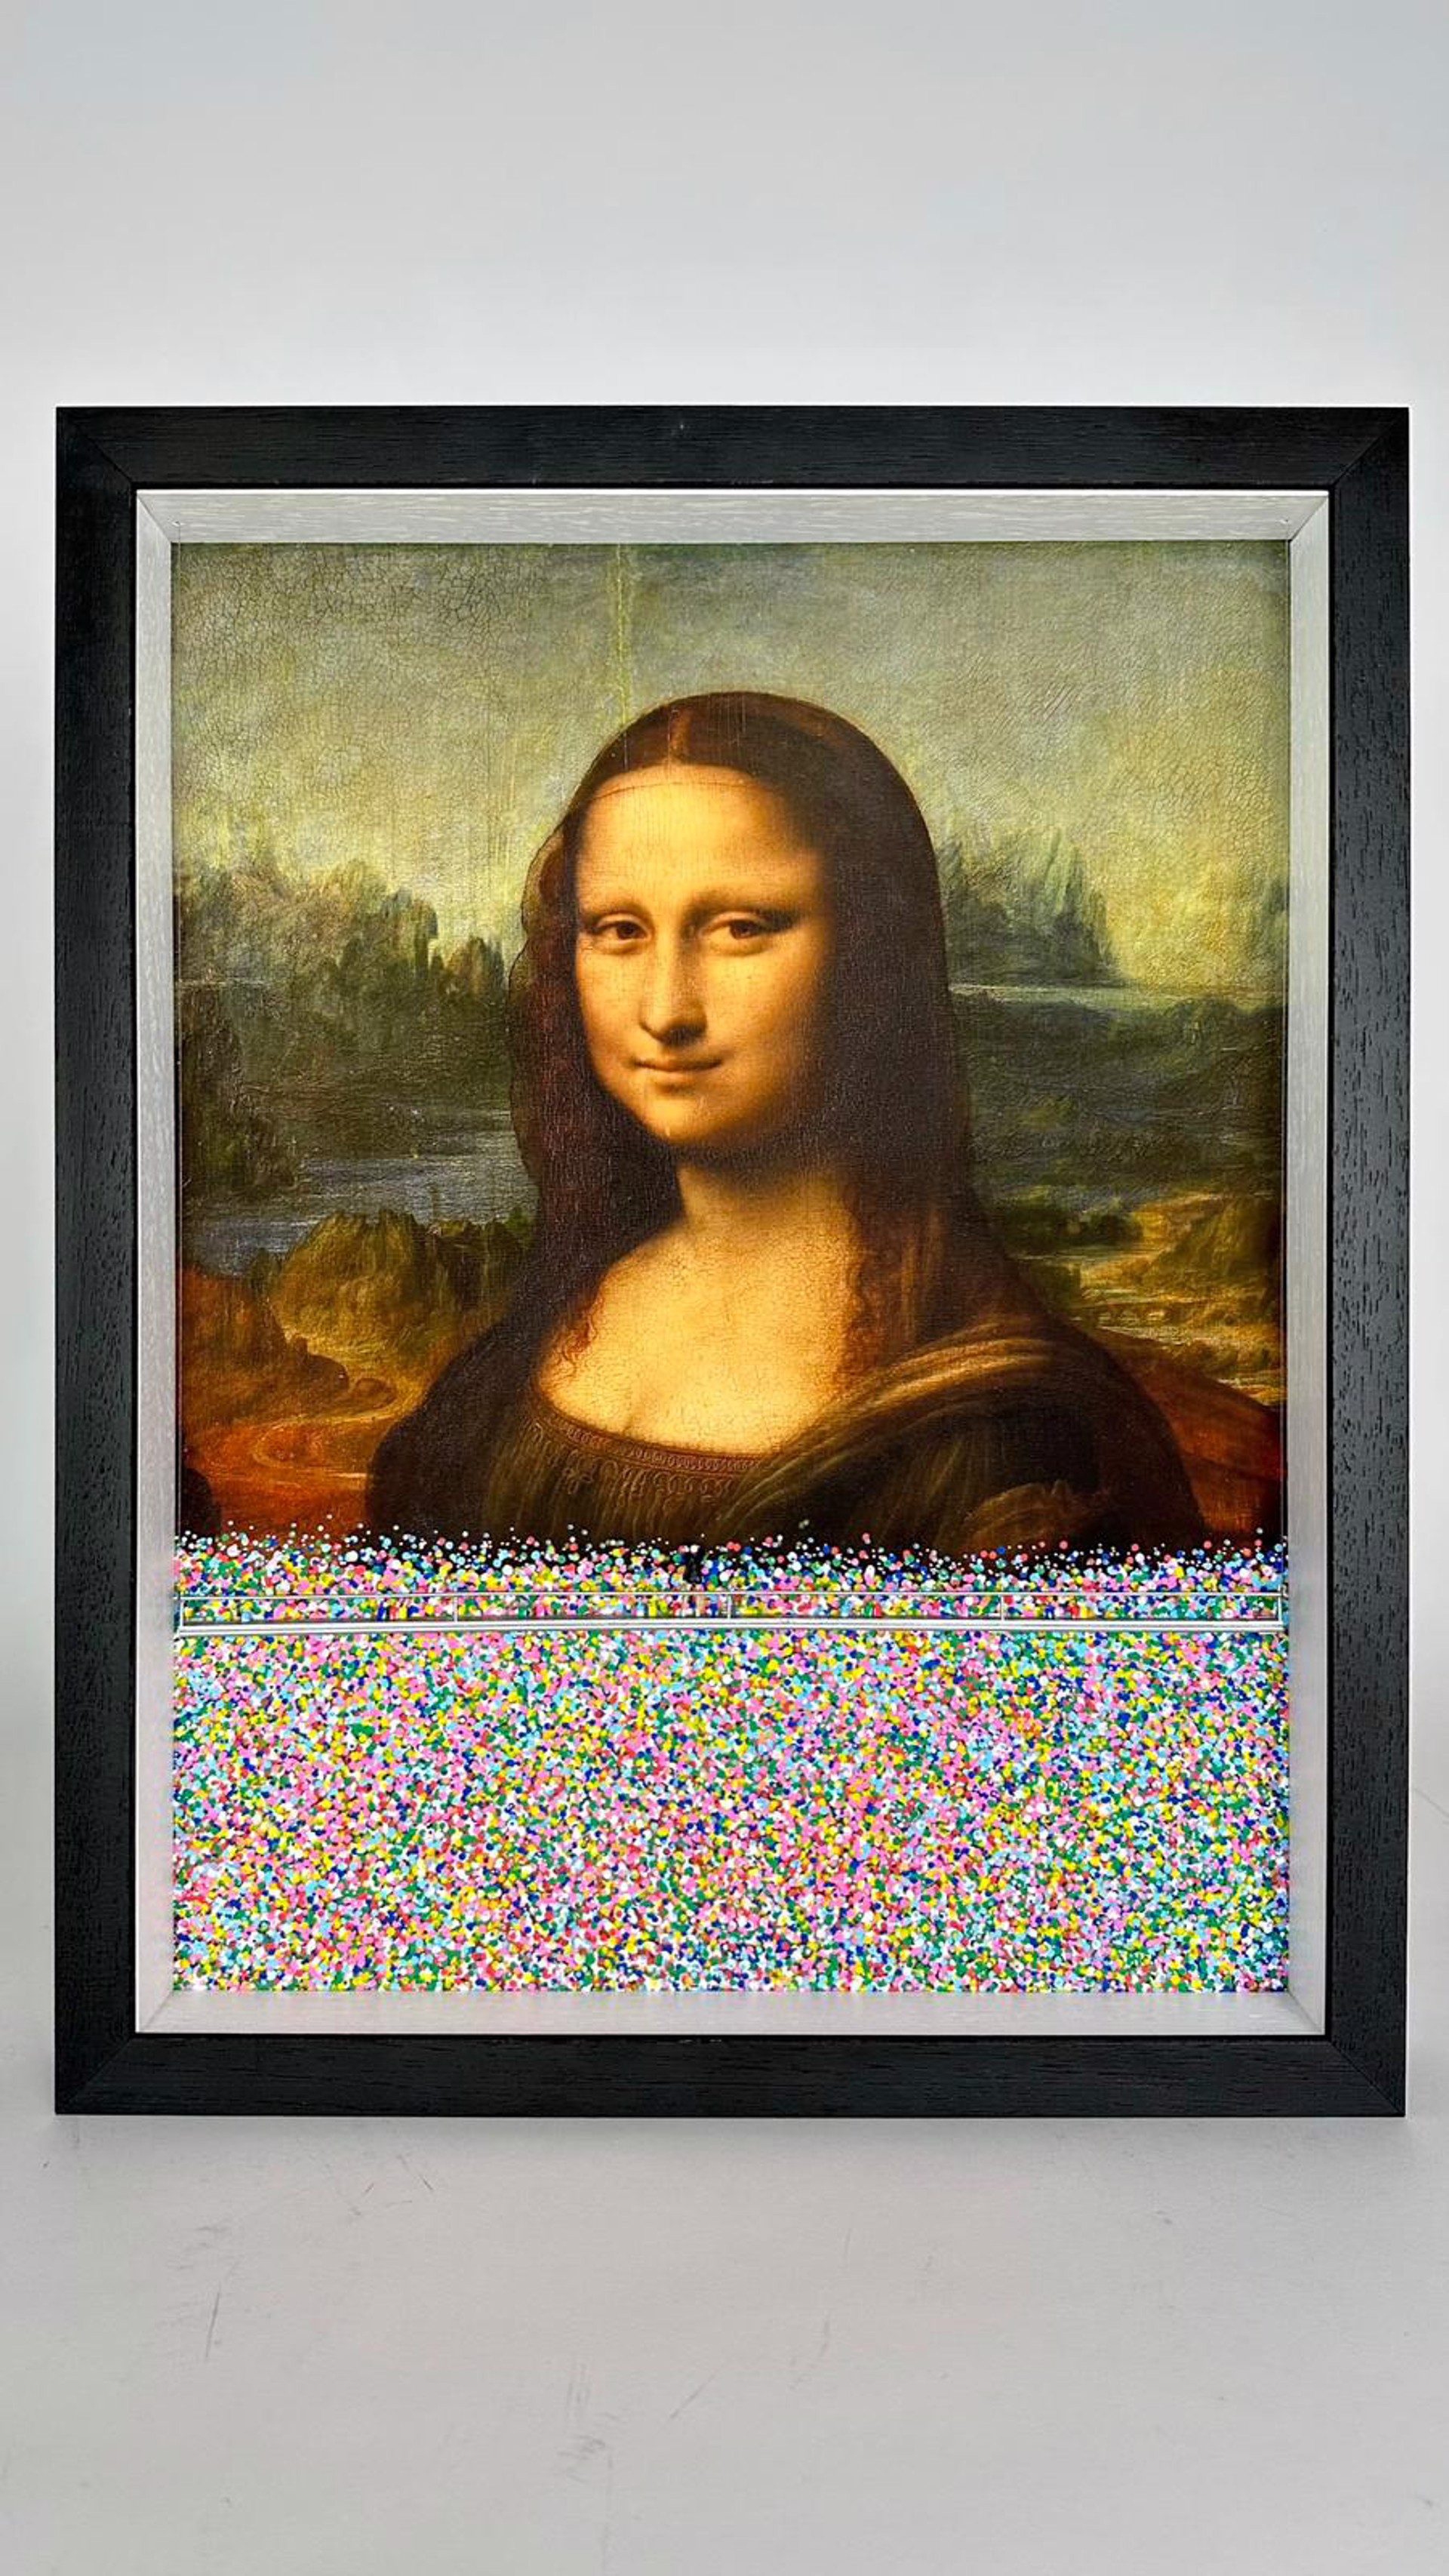 Mona Lisa with Dots by Roy's People